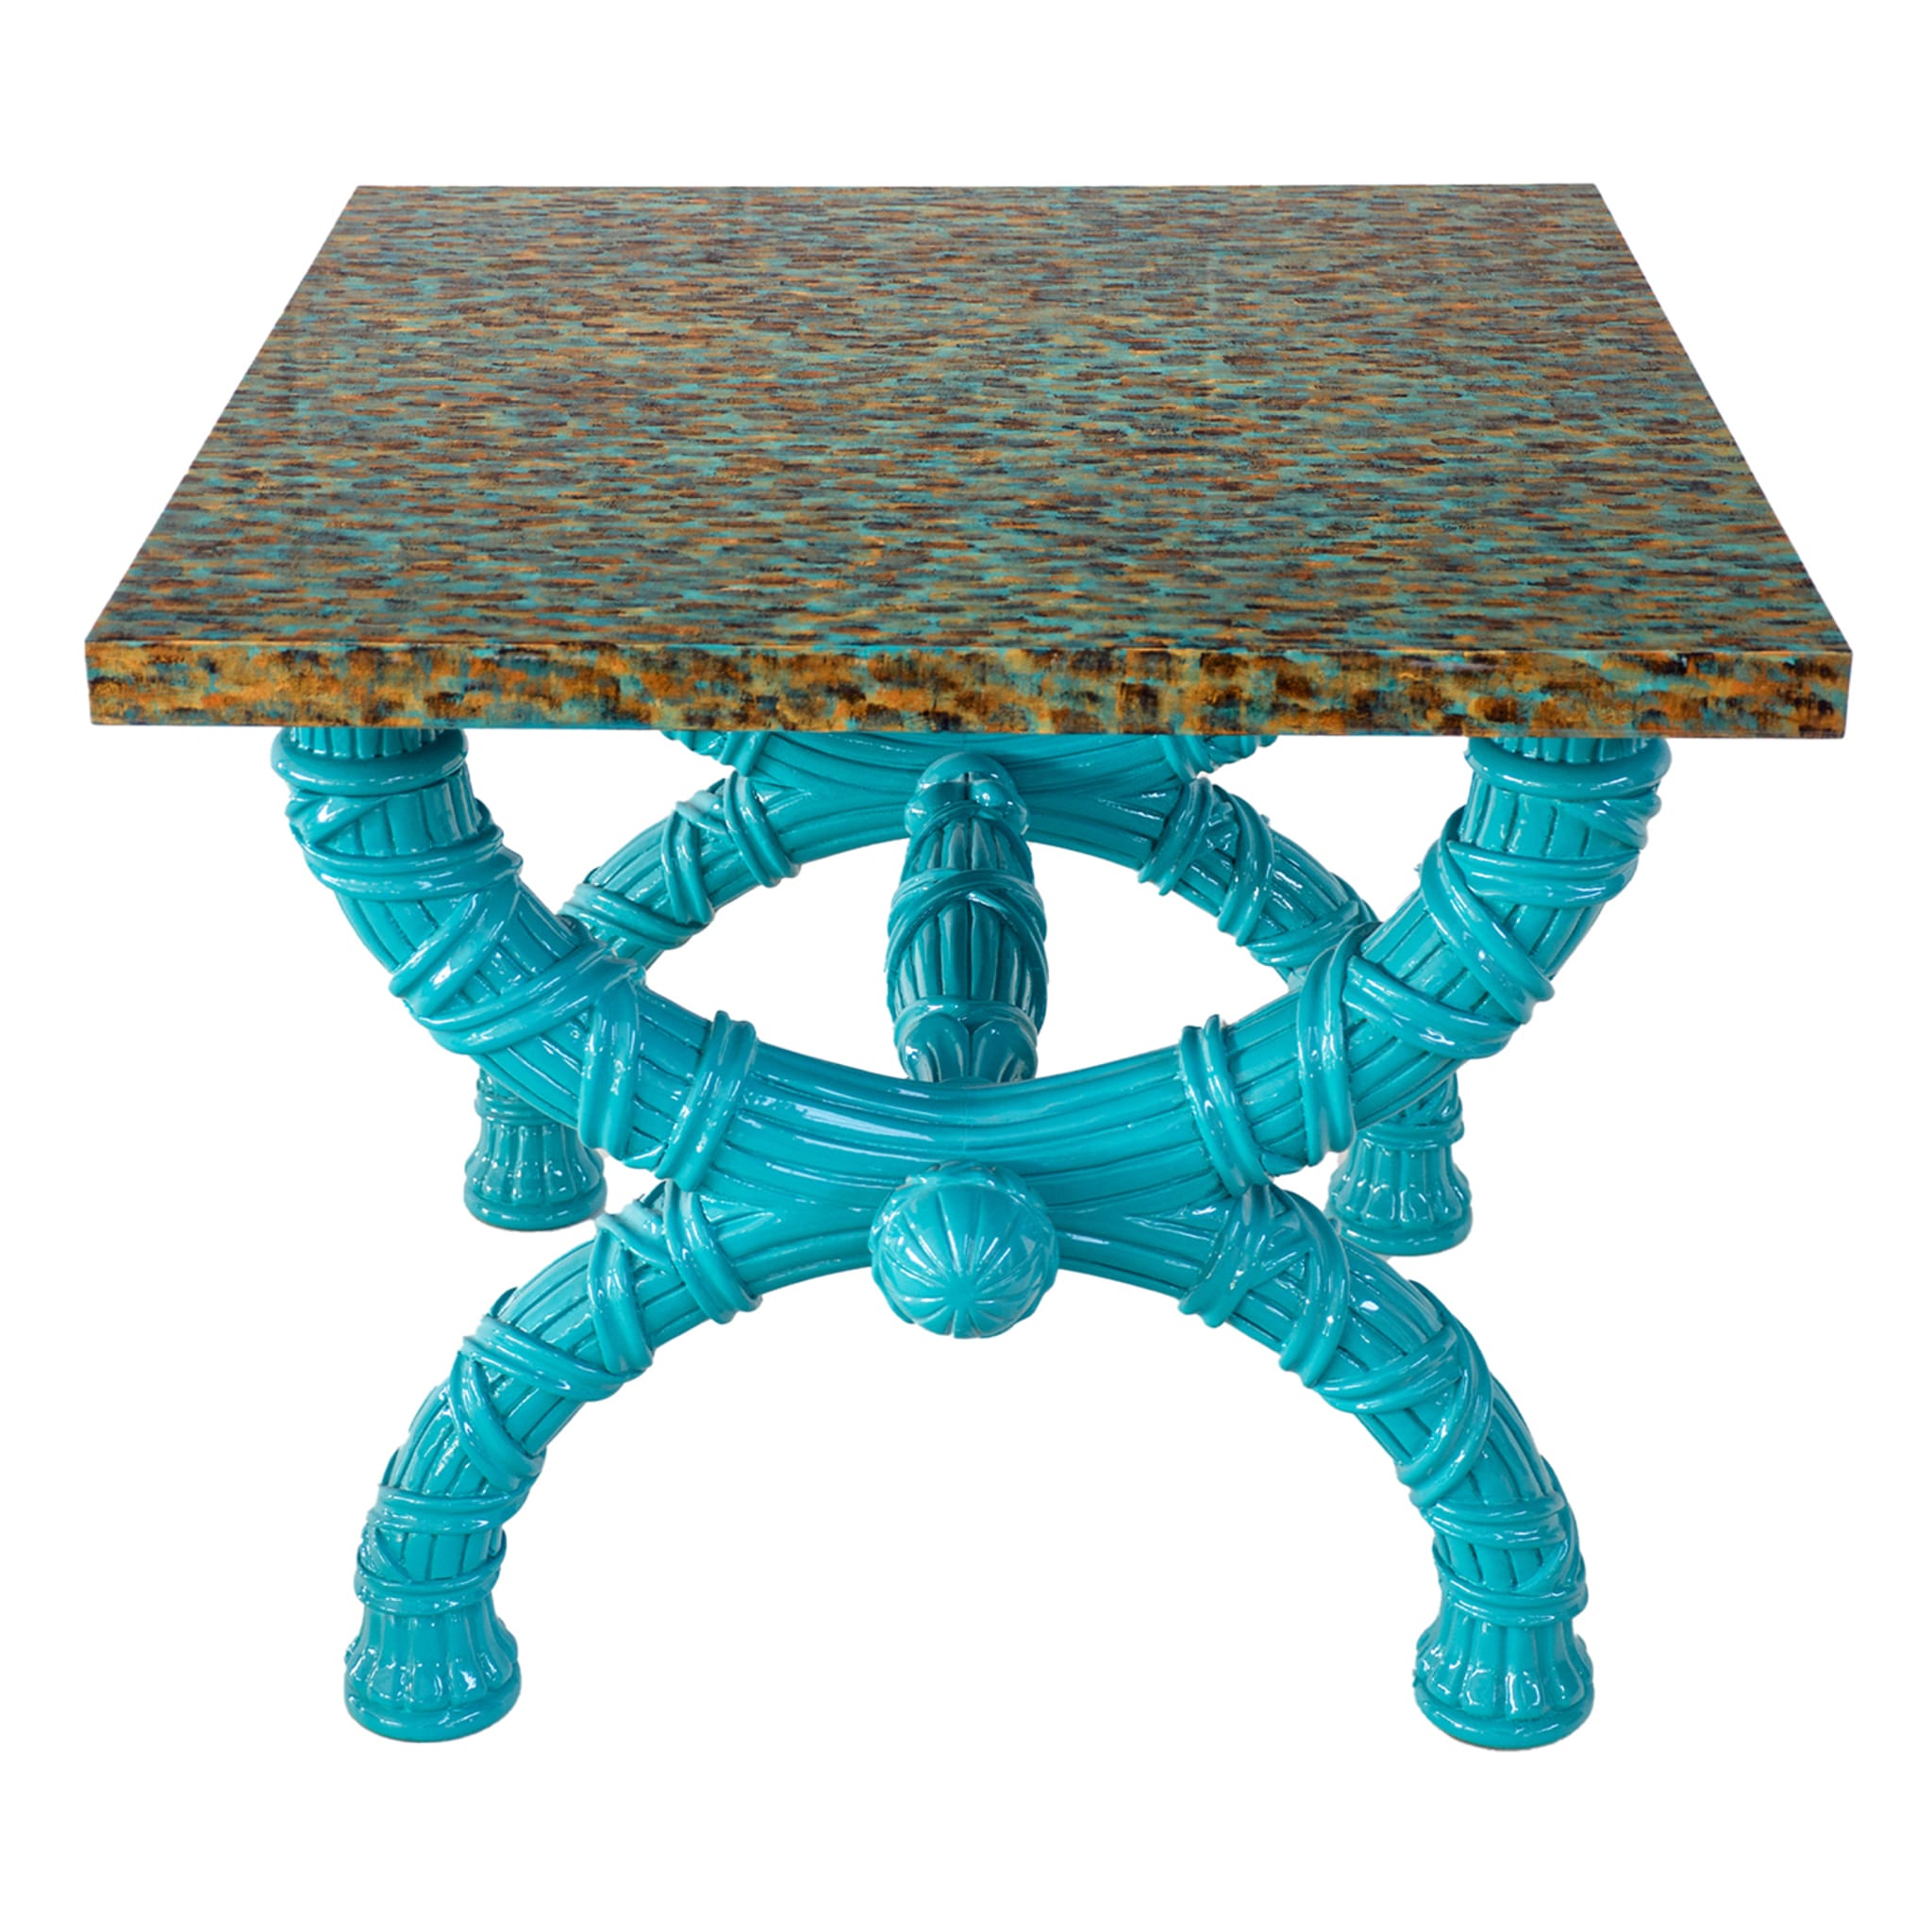 Turquoise Spider side table  - Alternative view 1